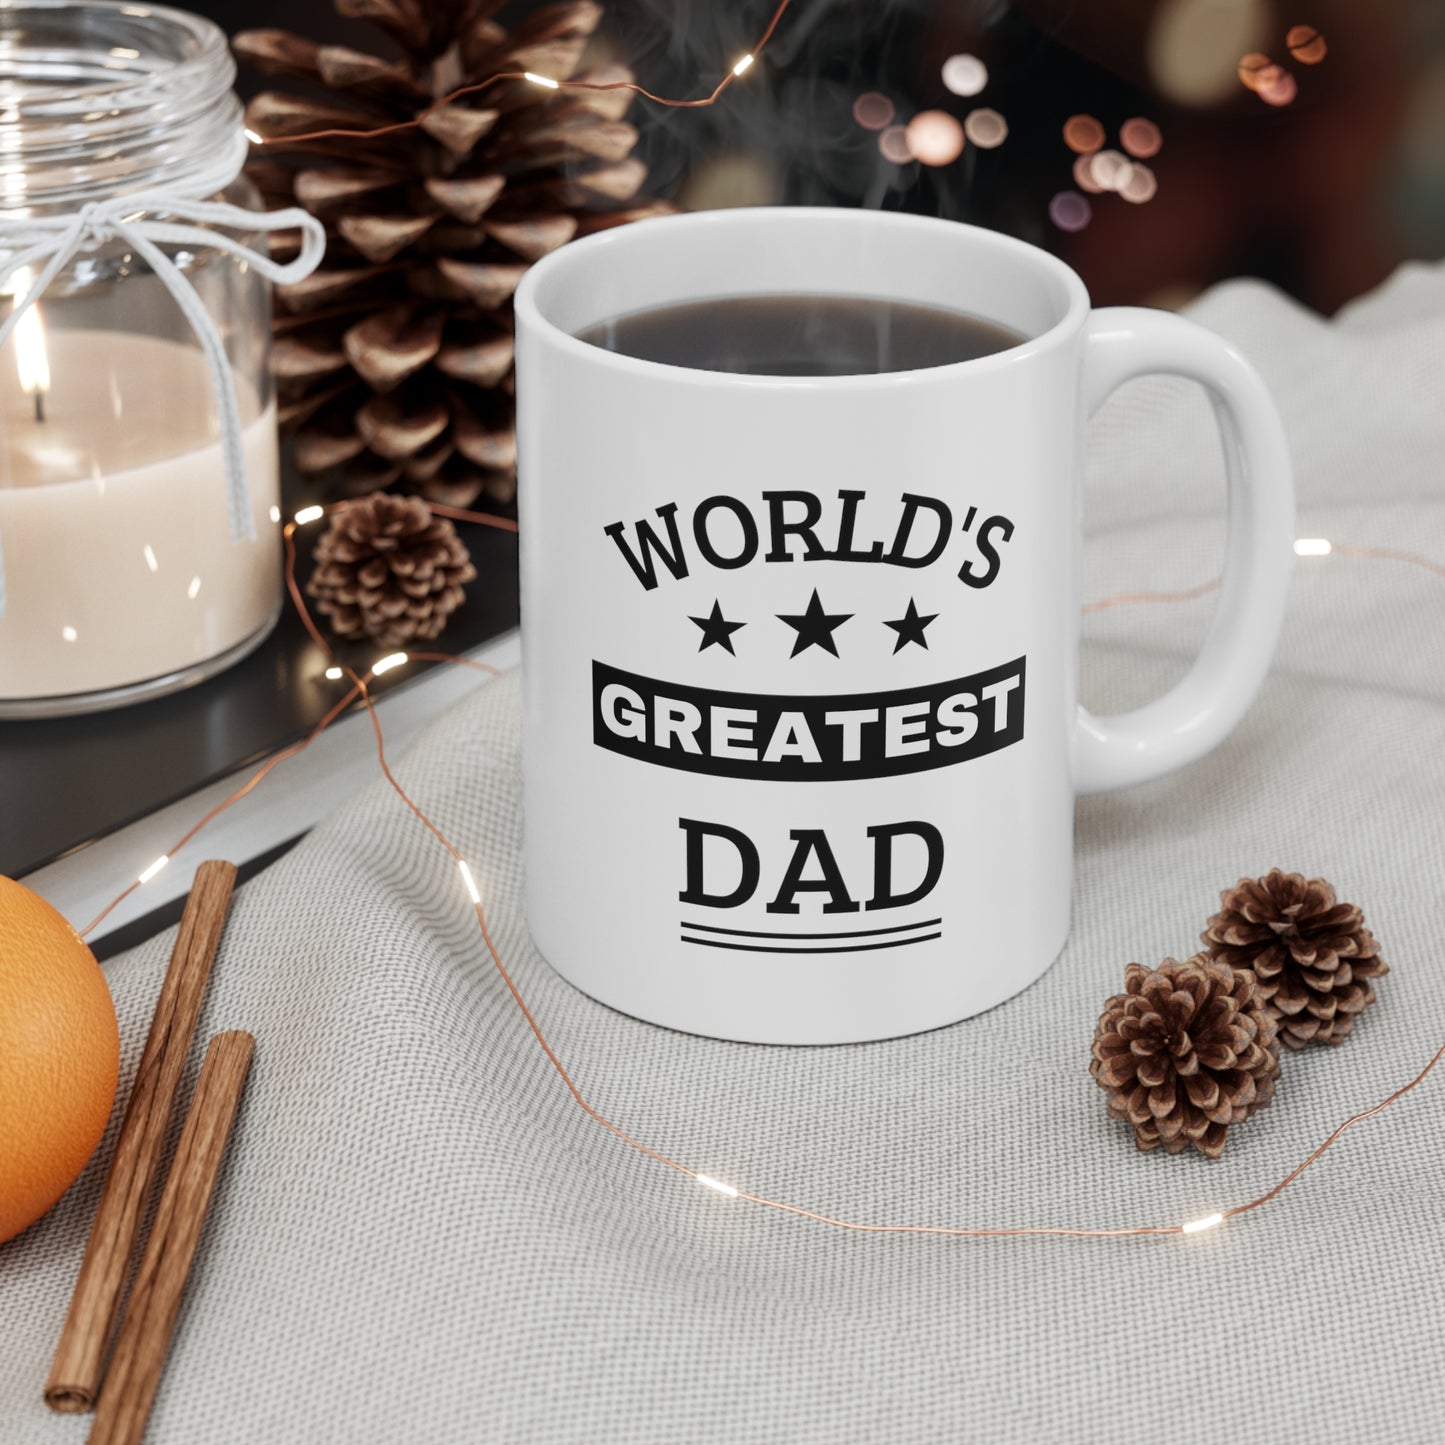 World's Greatest Mug for Dad - Best Gift for Father's Day